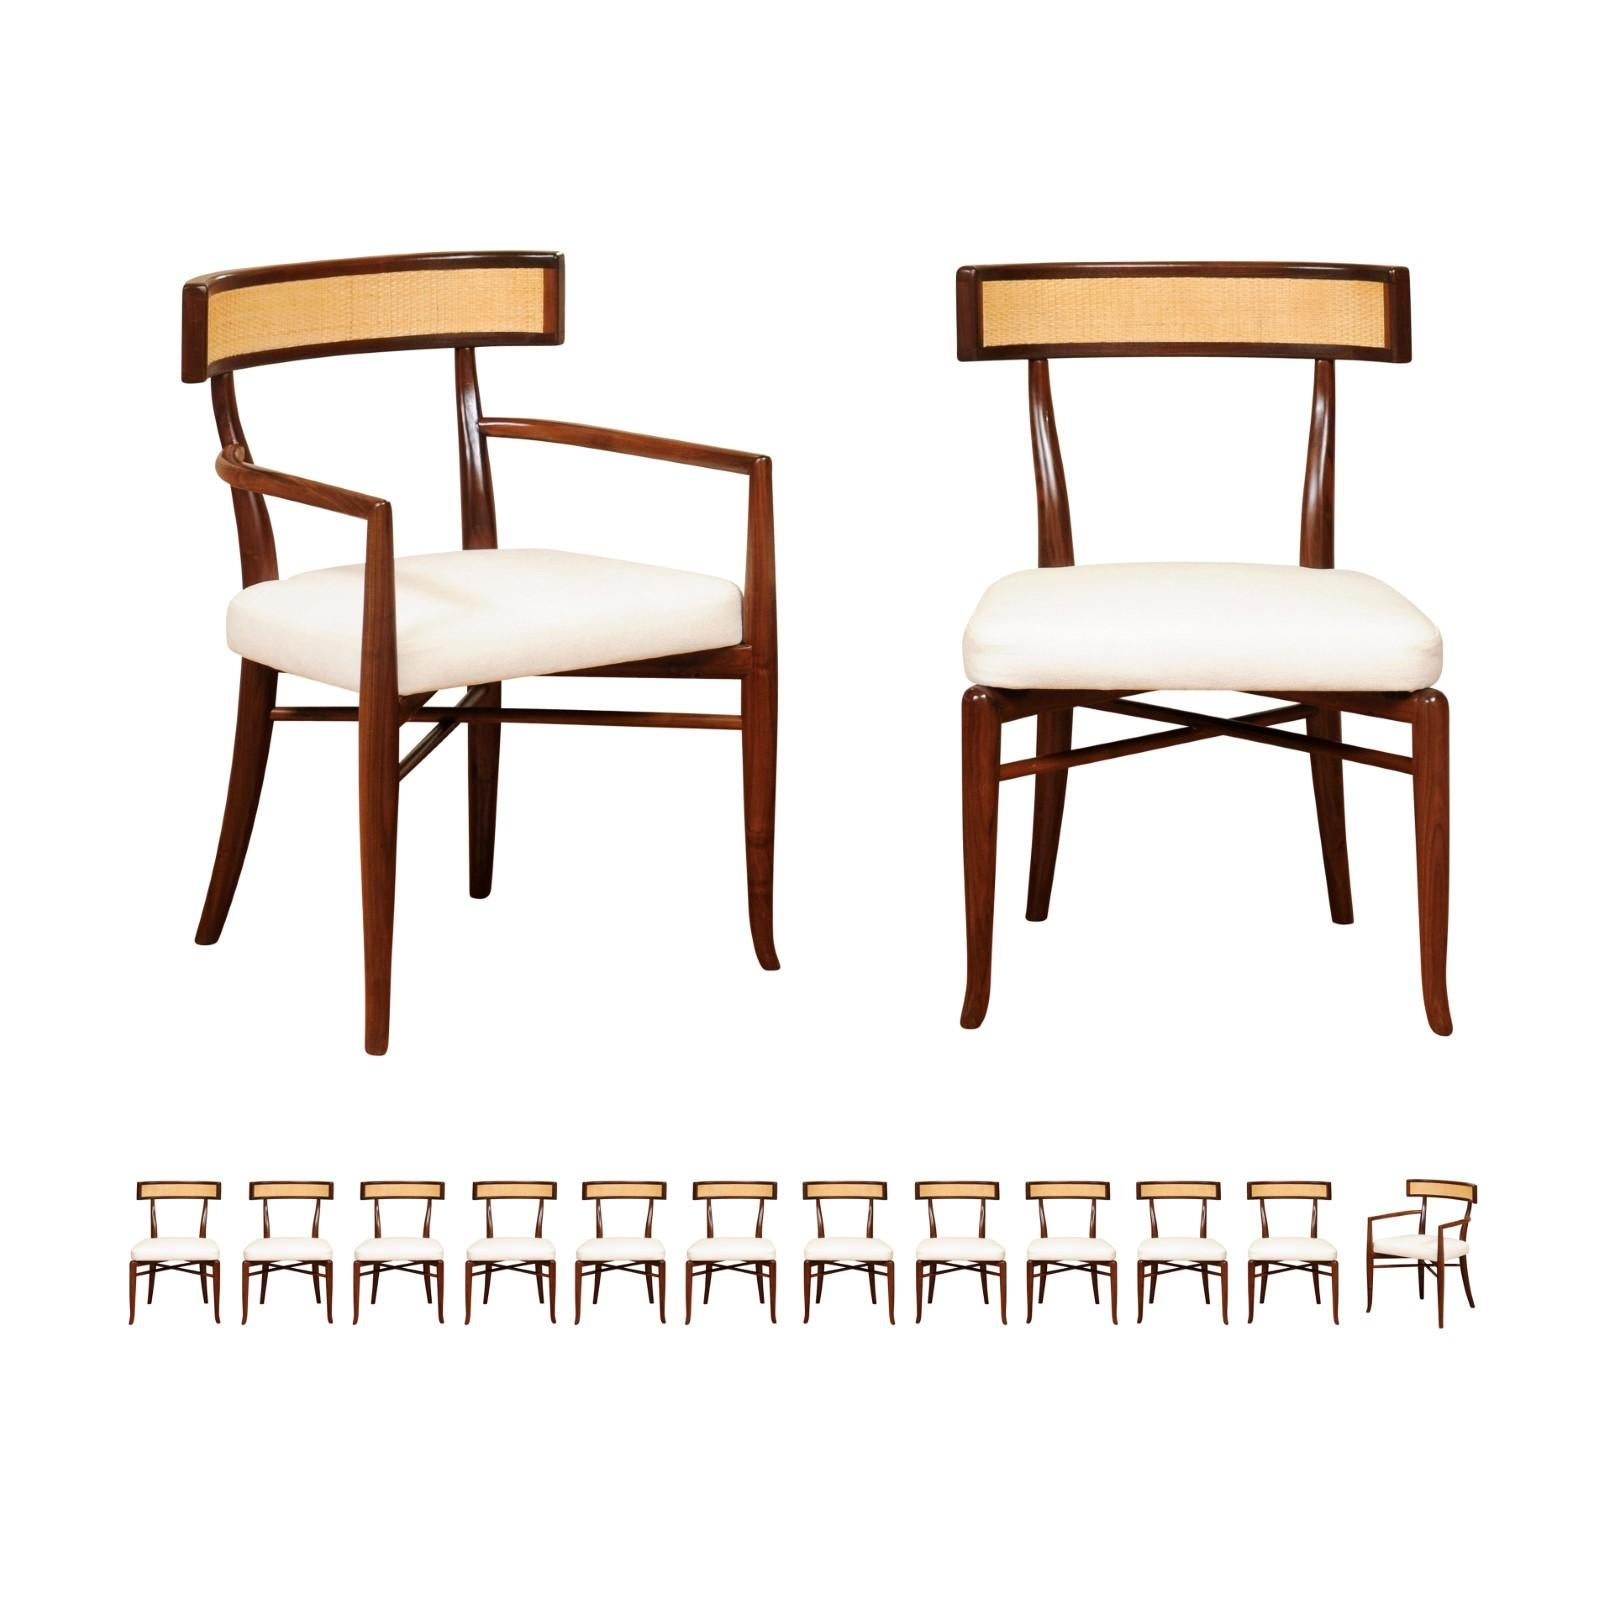 This magnificent set of dining chairs is shipped as professionally photographed and described in the listing narrative: Meticulously professionally restored, newly upholstered and completely installation ready. The custom cane back is a modification